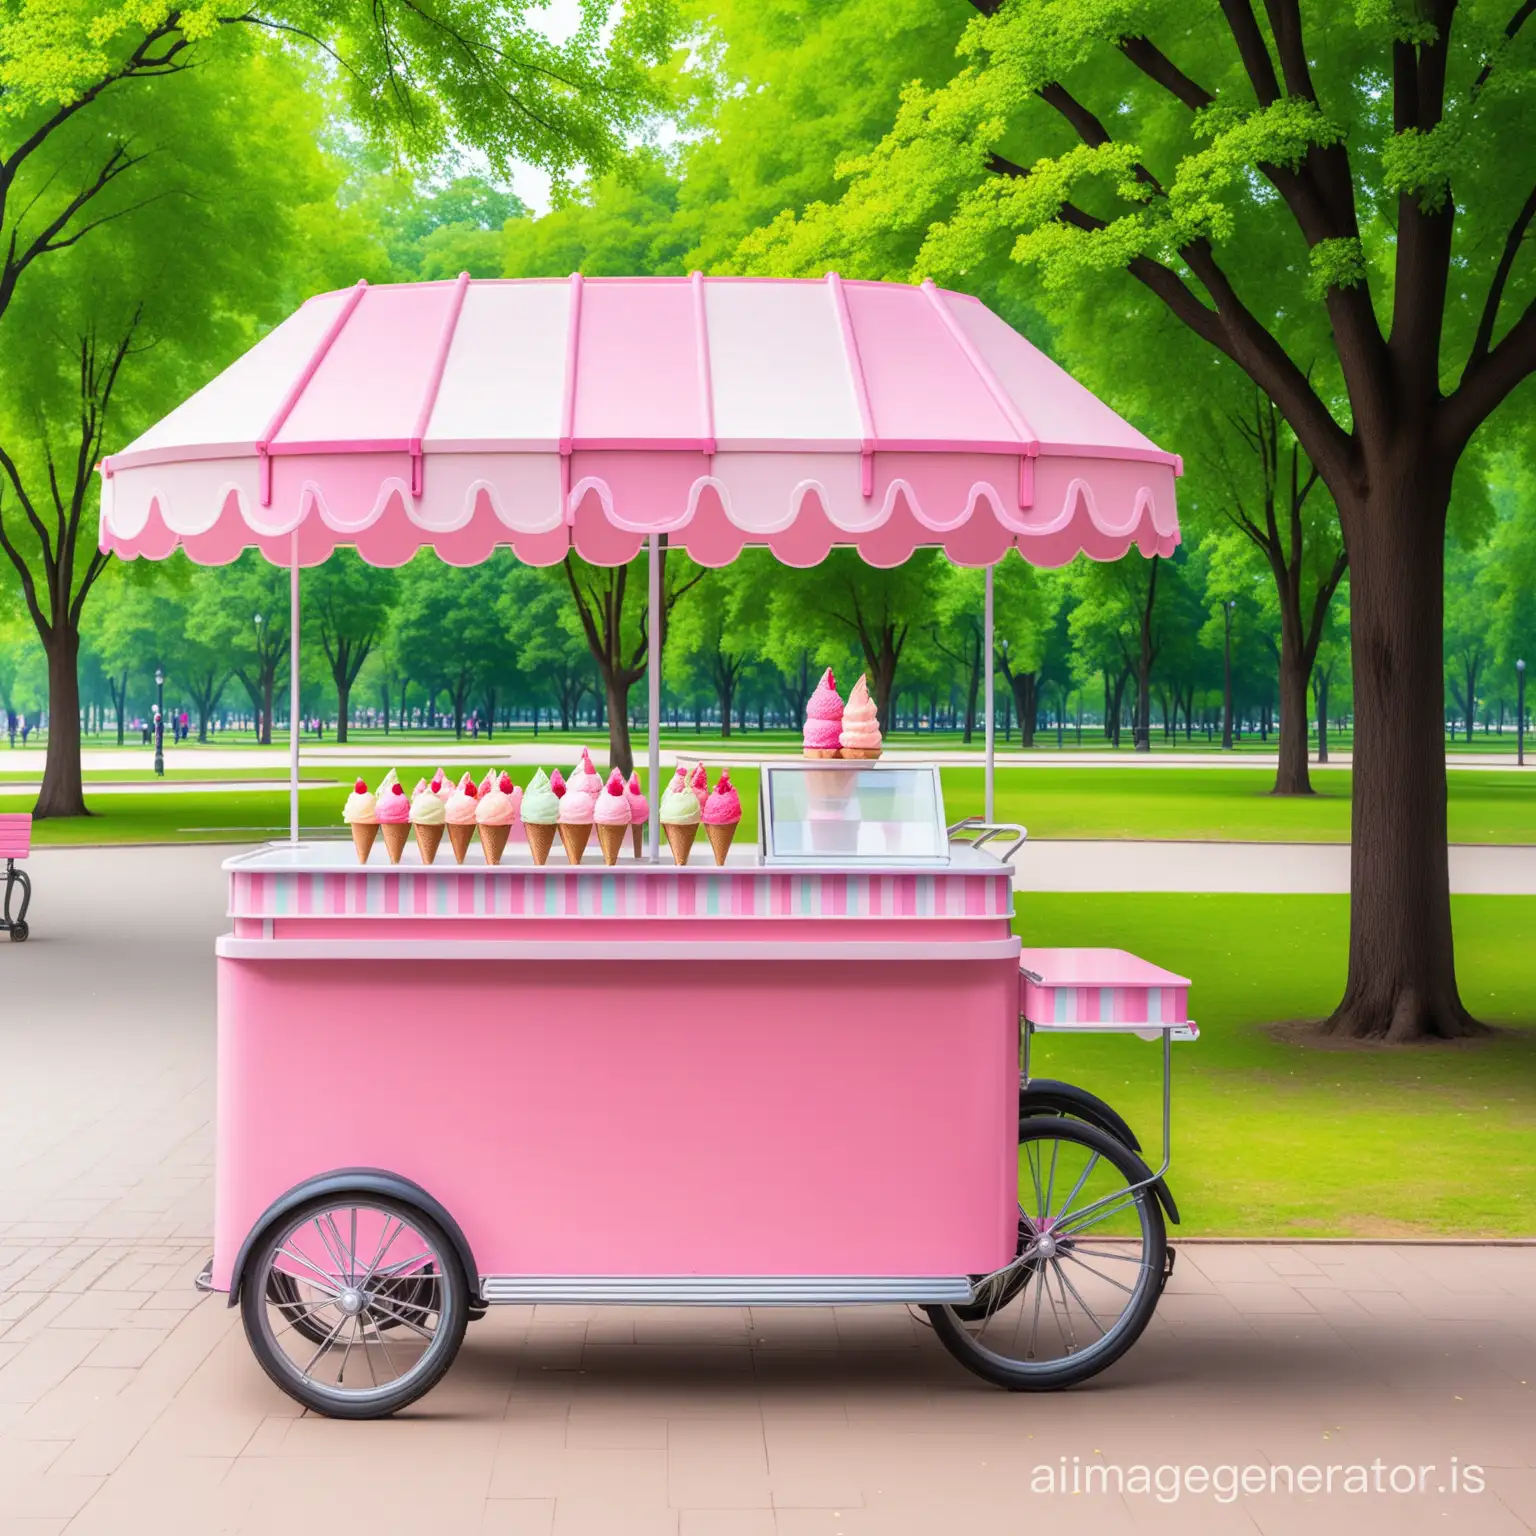 image of a pink ice cream cart in a park